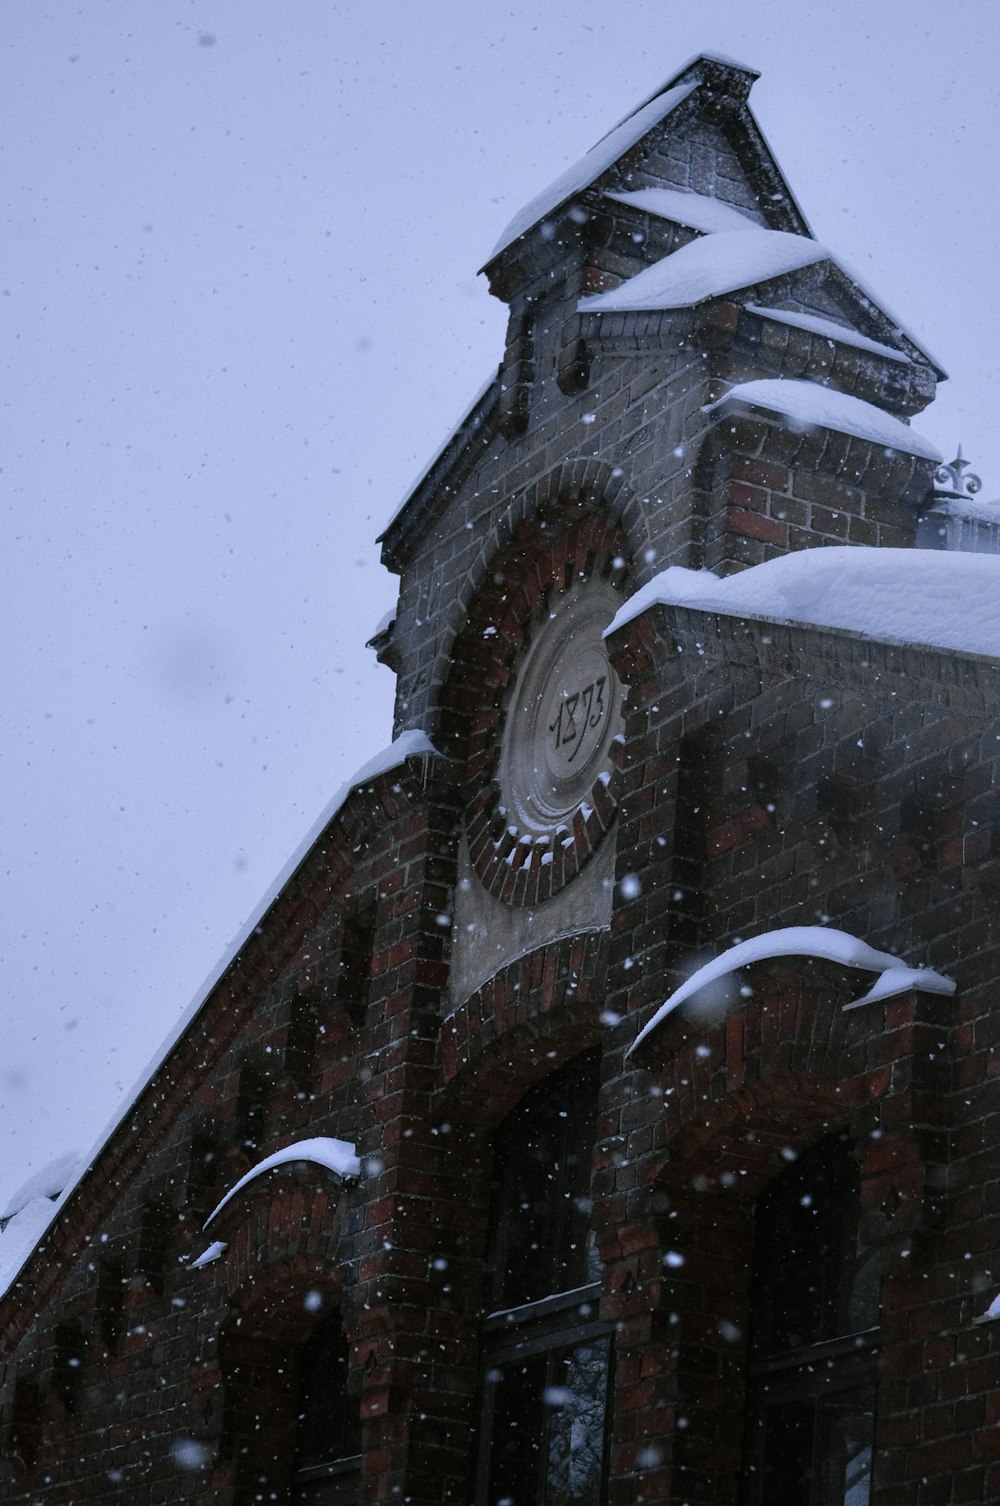 a clock tower covered in snow on a snowy day